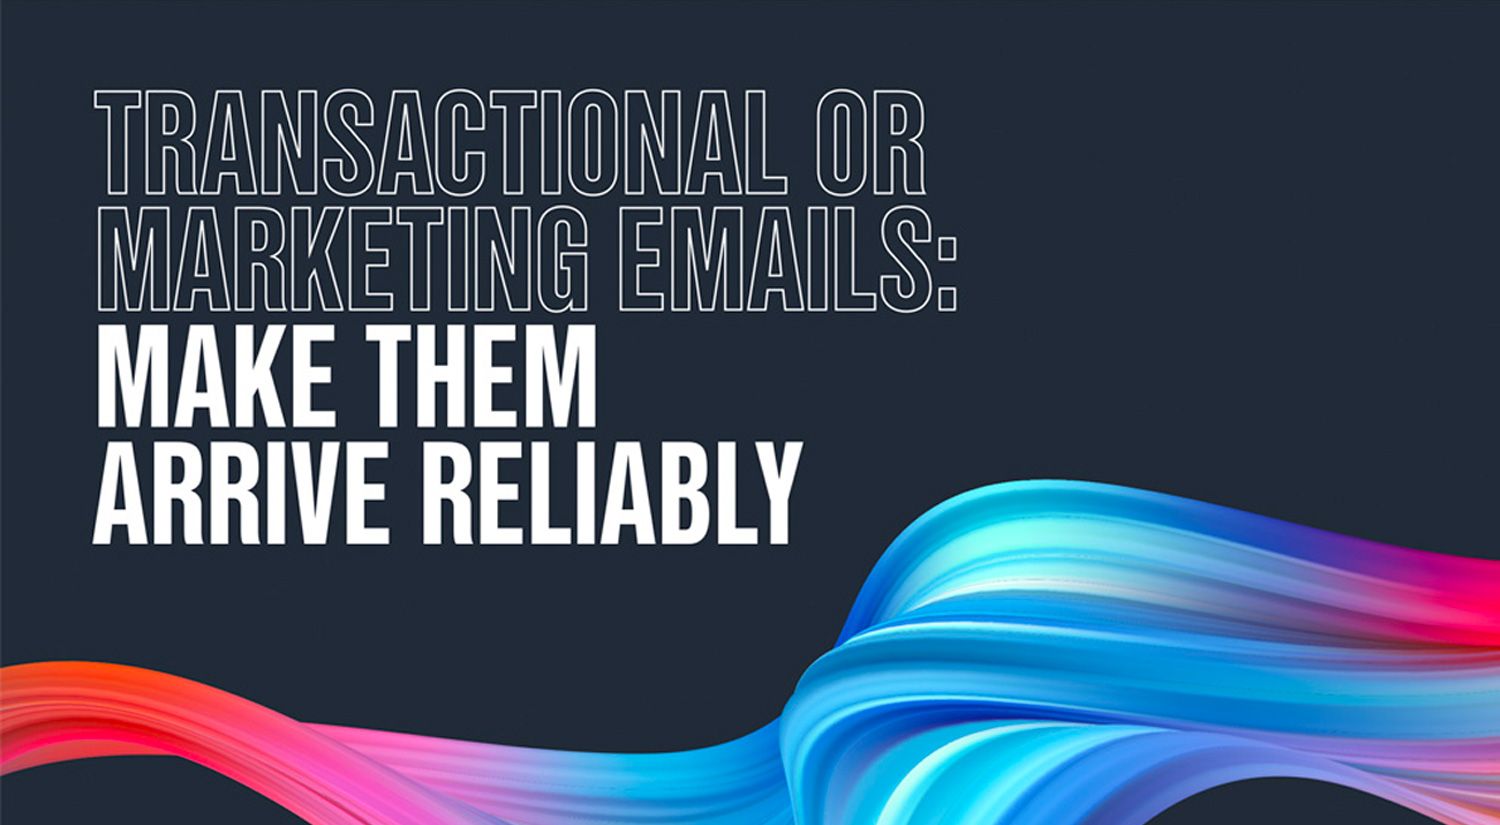 Transactional Email or Marketing Emails: Make them arrive reliably